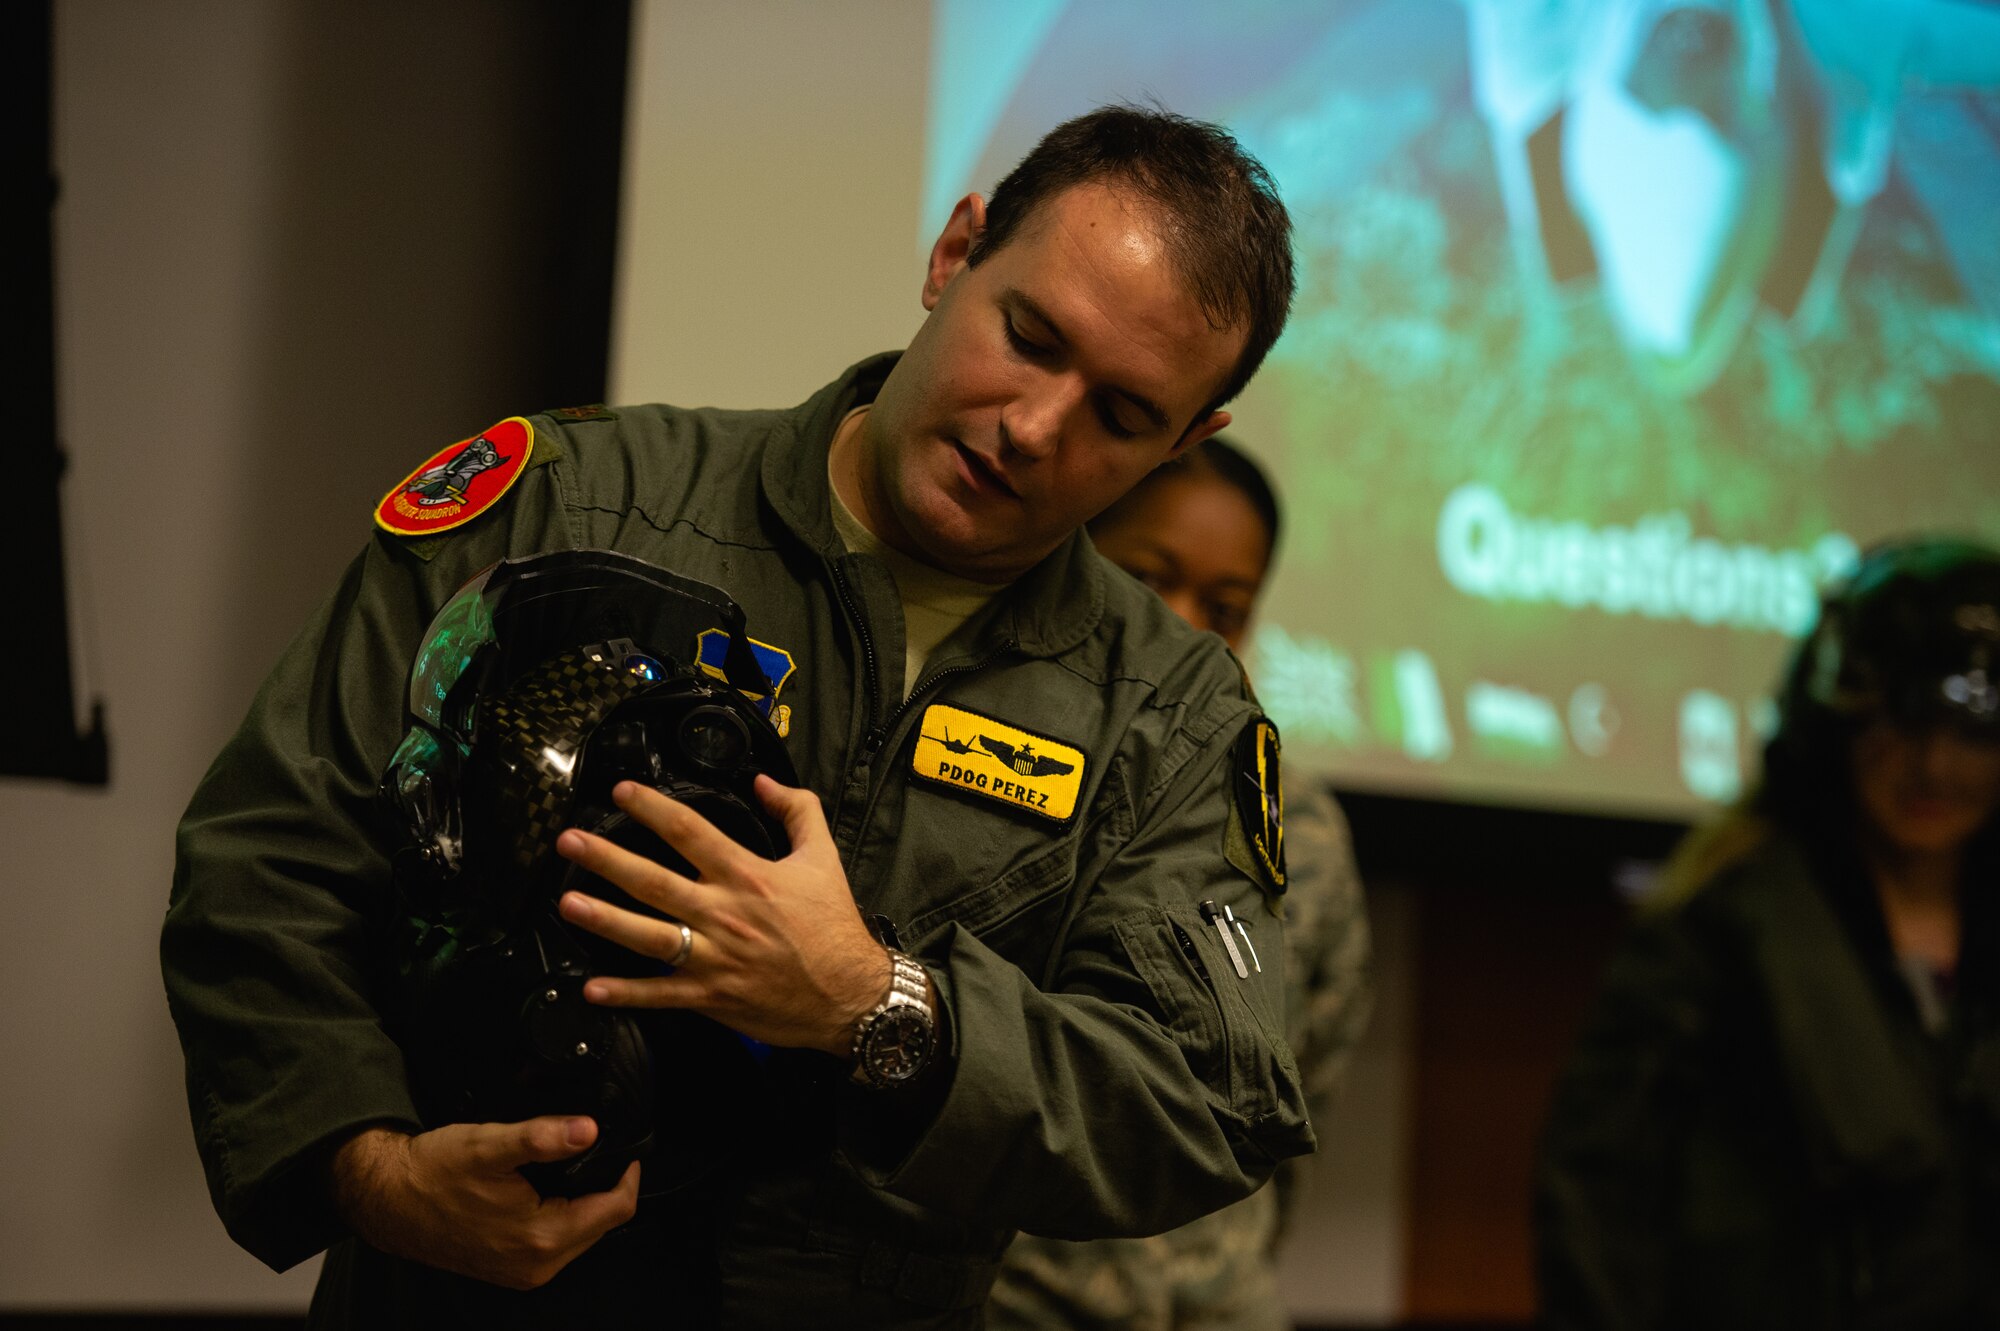 Maj. Fernando Perez, 61st Fighter Squadron, director of weapons, briefs members of the Personalized Learning Cohort about an F-35A Lightning II helmet during a visit to Luke Air Force Base, Ariz., Nov. 2, 2018. Throughout the tour, members of the cohort were given the opportunity to speak with Airmen and receive a comprehensive review of some of the resources and tools used to train fighter pilots. (U.S. Air Force photo by Senior Airman Alexander Cook)